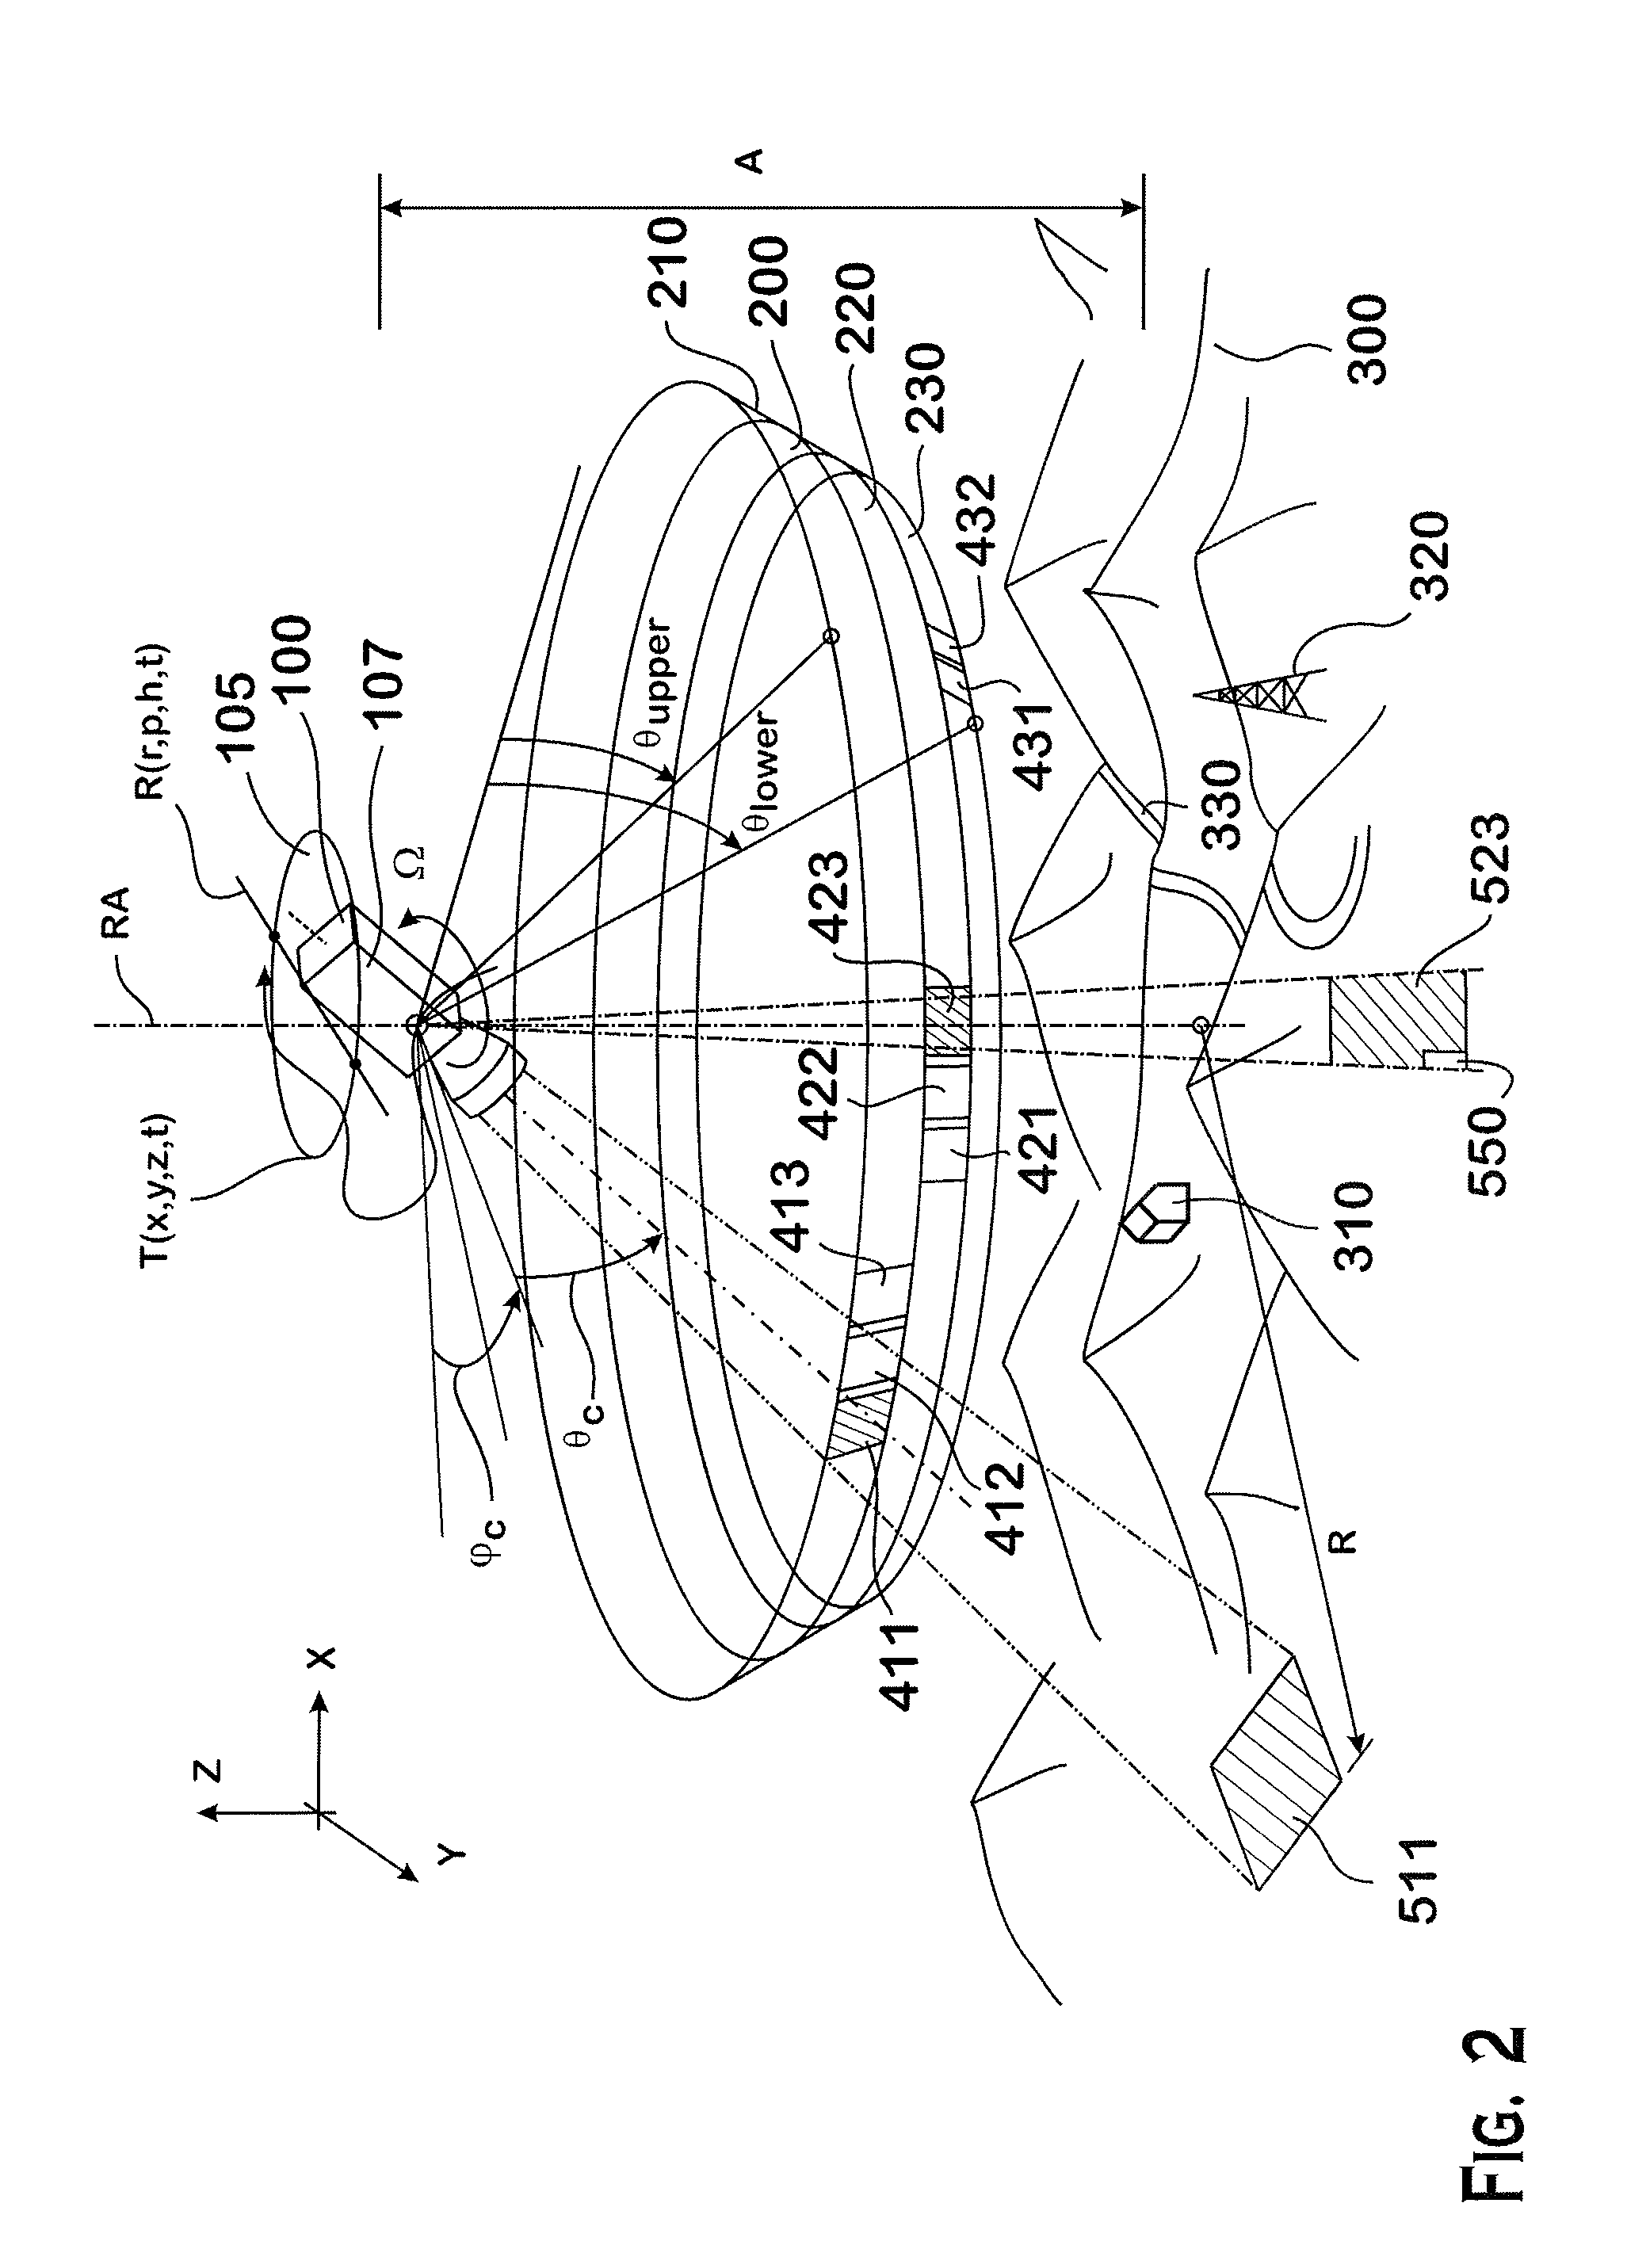 Method, device, and system for computing a spherical projection image based on two-dimensional images